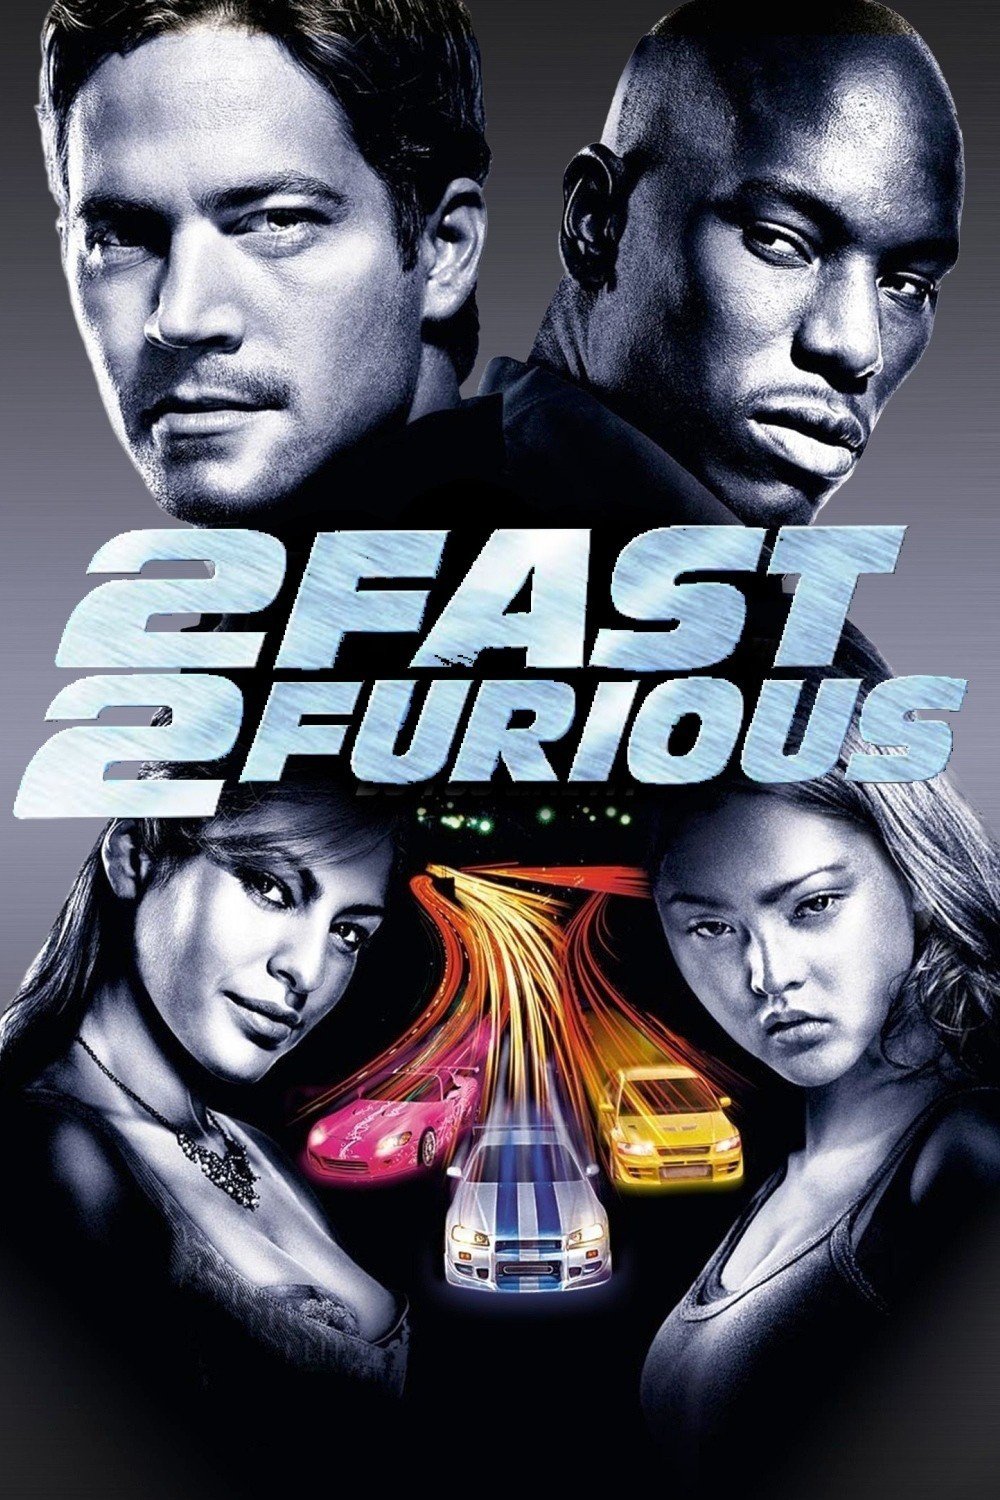 2 fast 2 furious download torrent